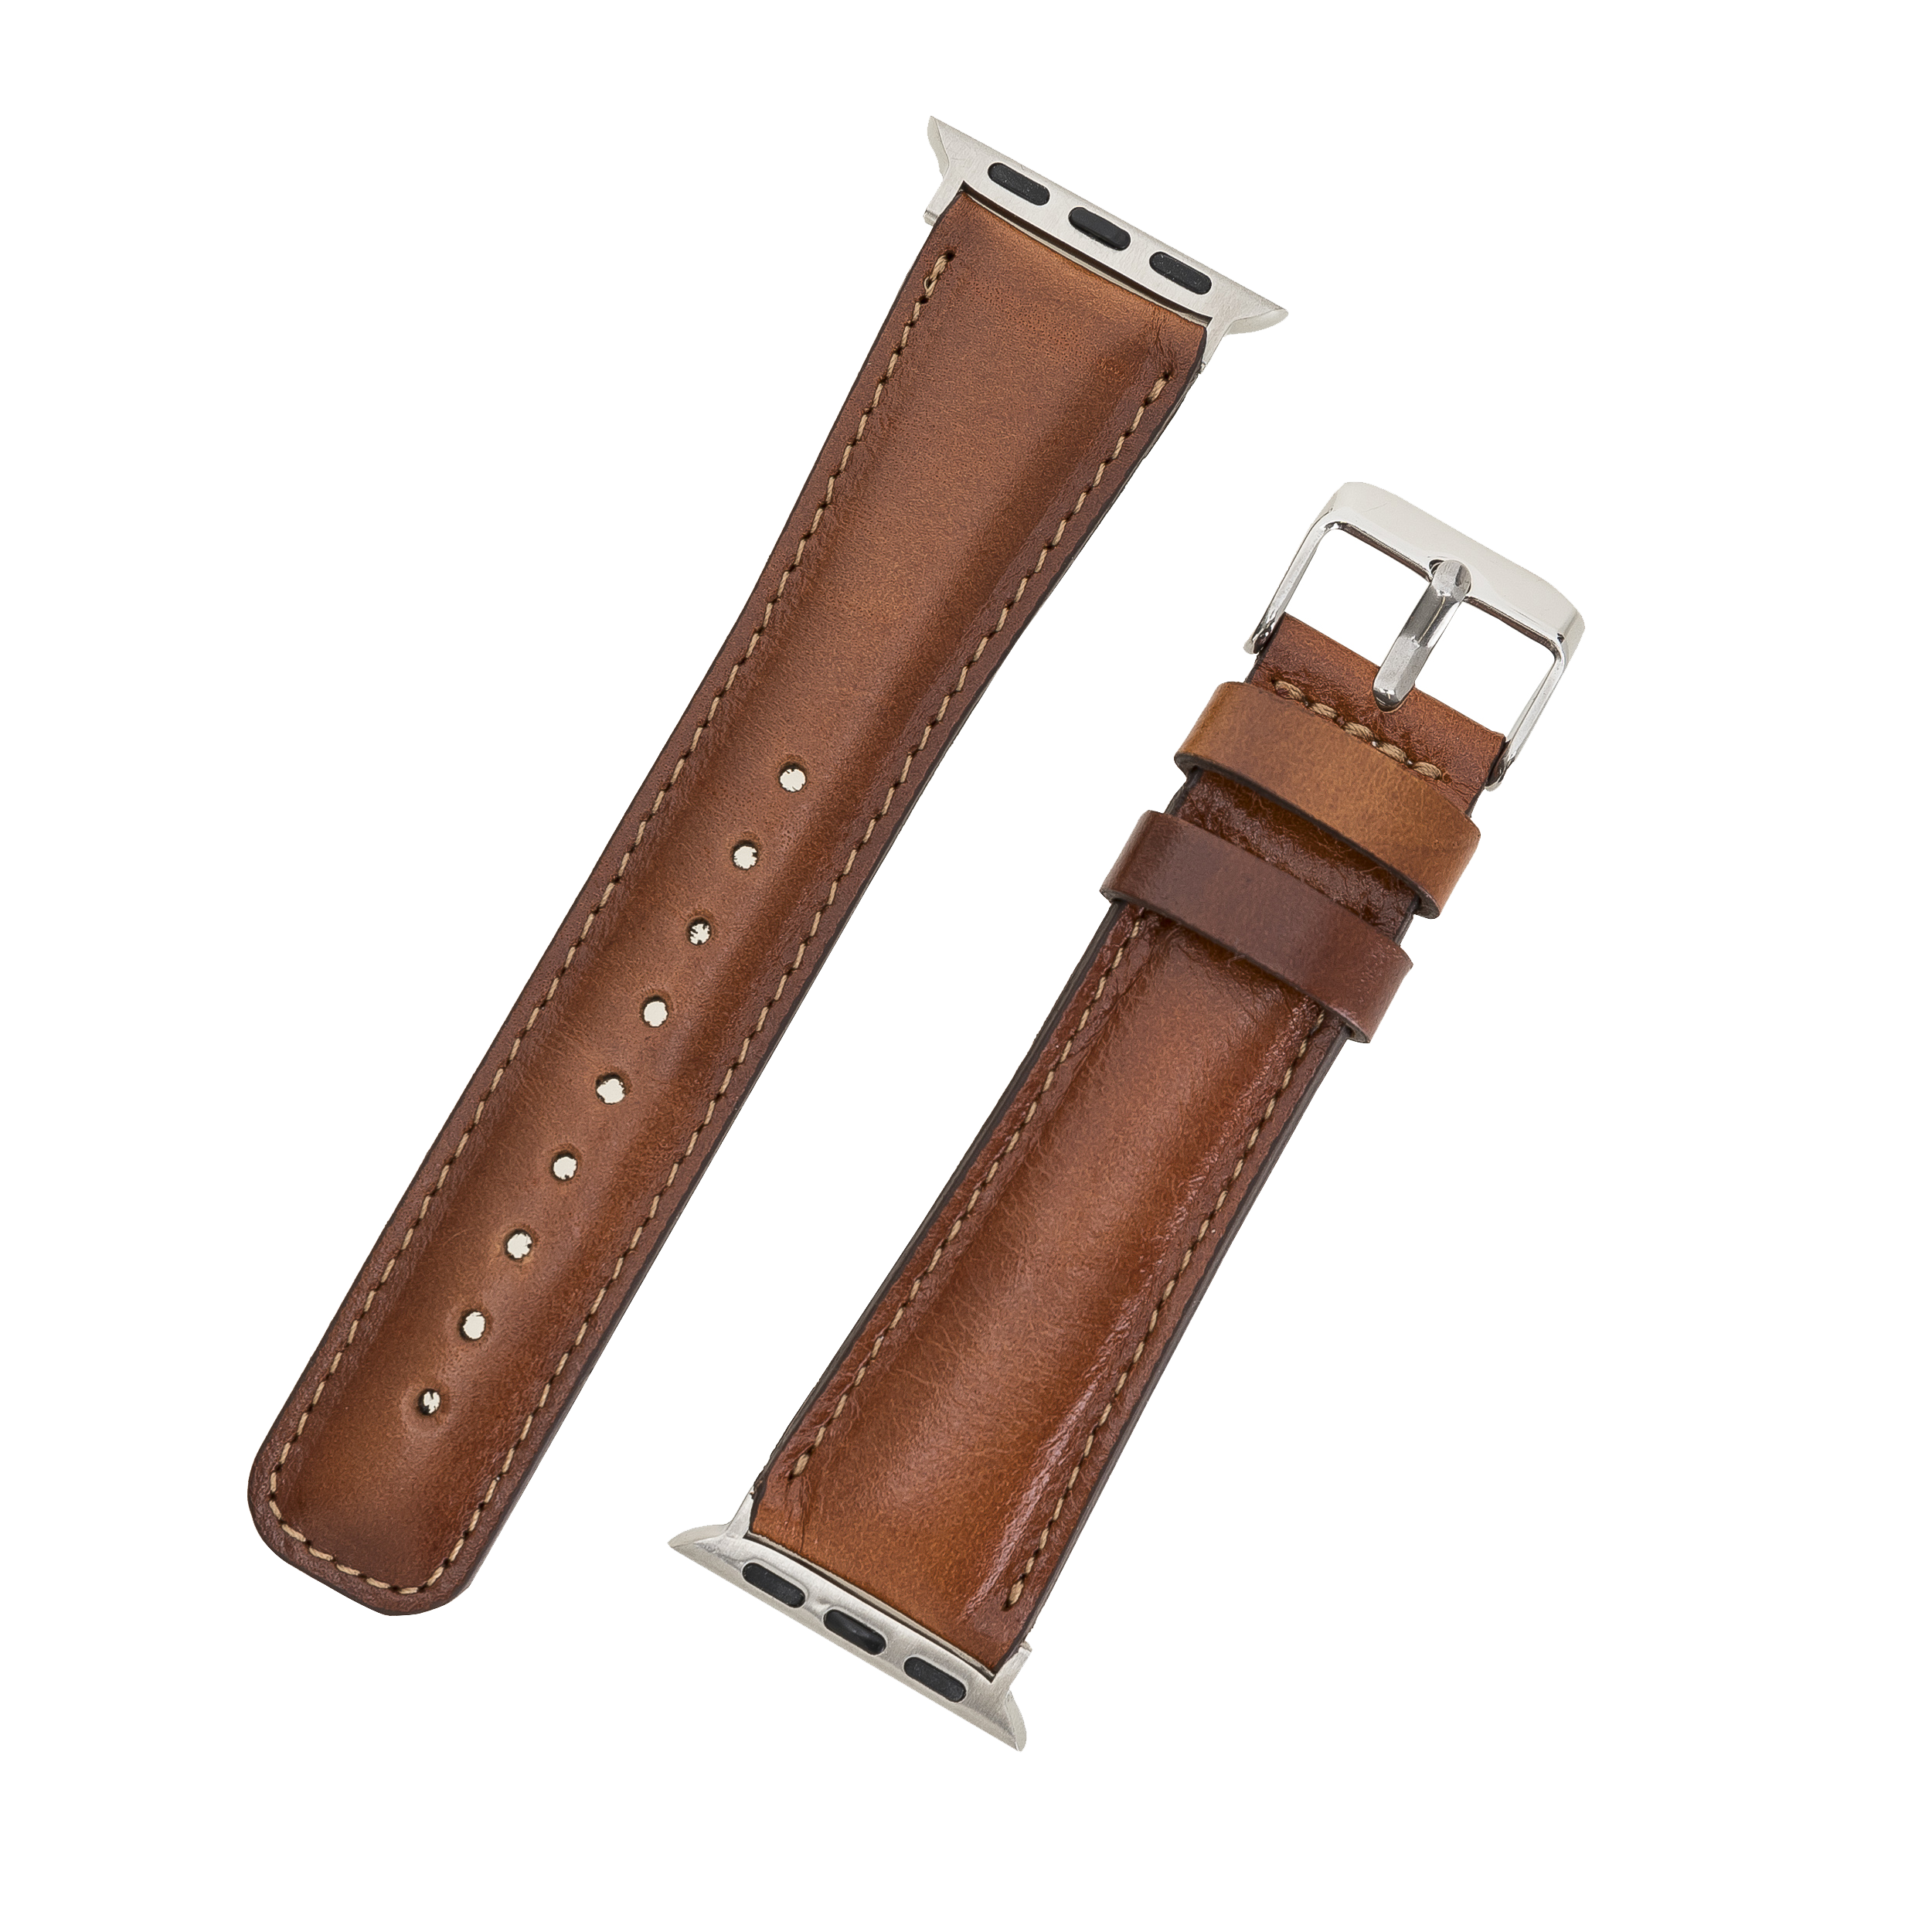 LupinnyLeather Liverpool Collection Leather Watch Band for Apple & Fitbit Versa Watch Band 19